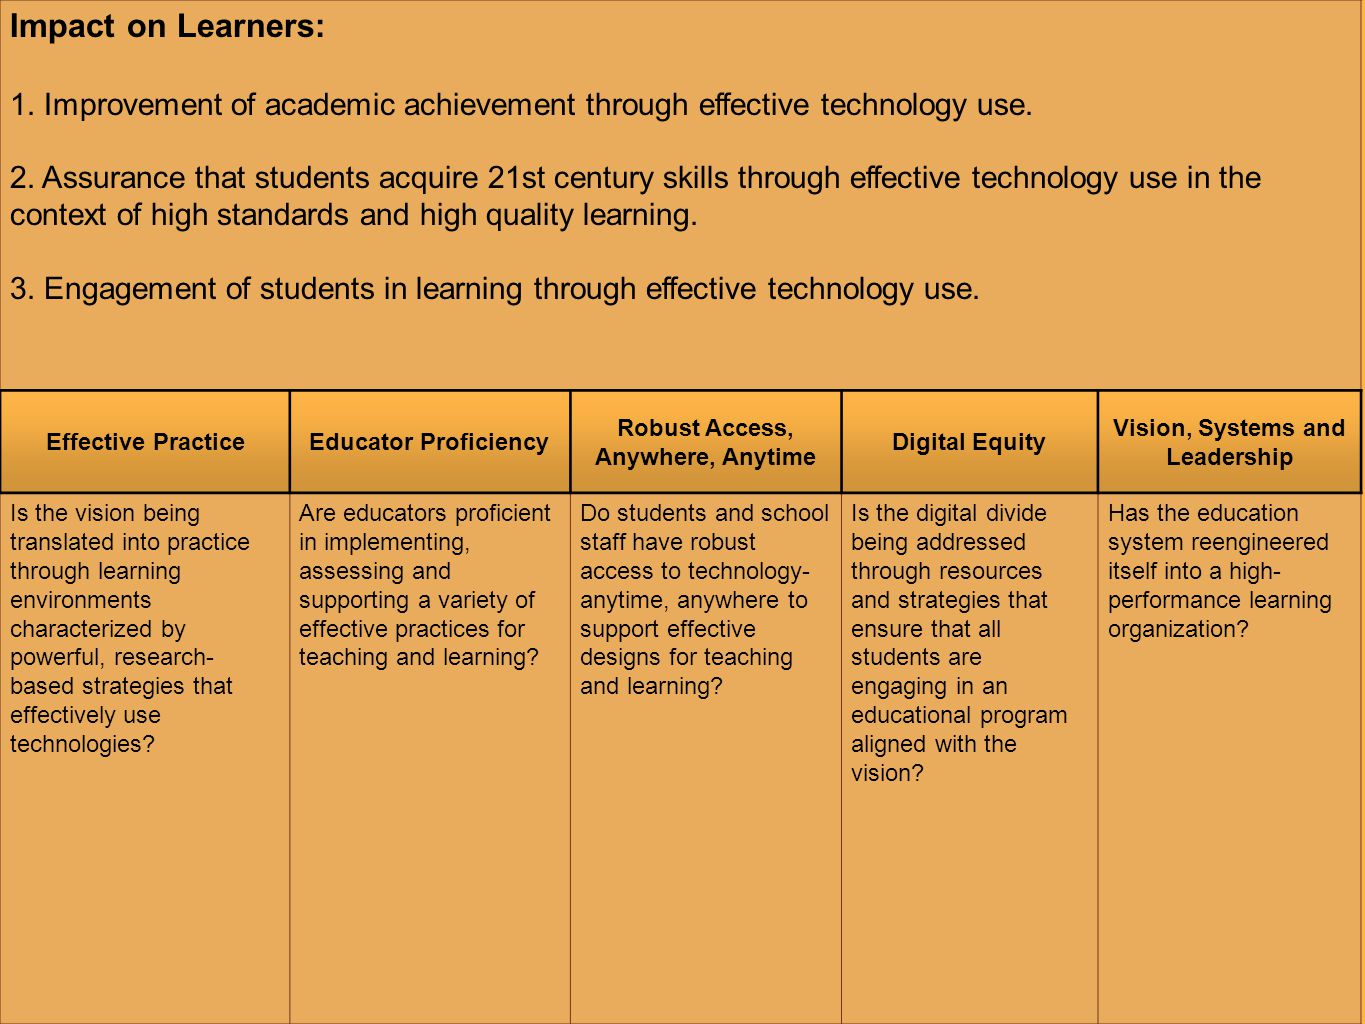 Impact on Learners: 1. Improvement of academic achievement through effective technology use.